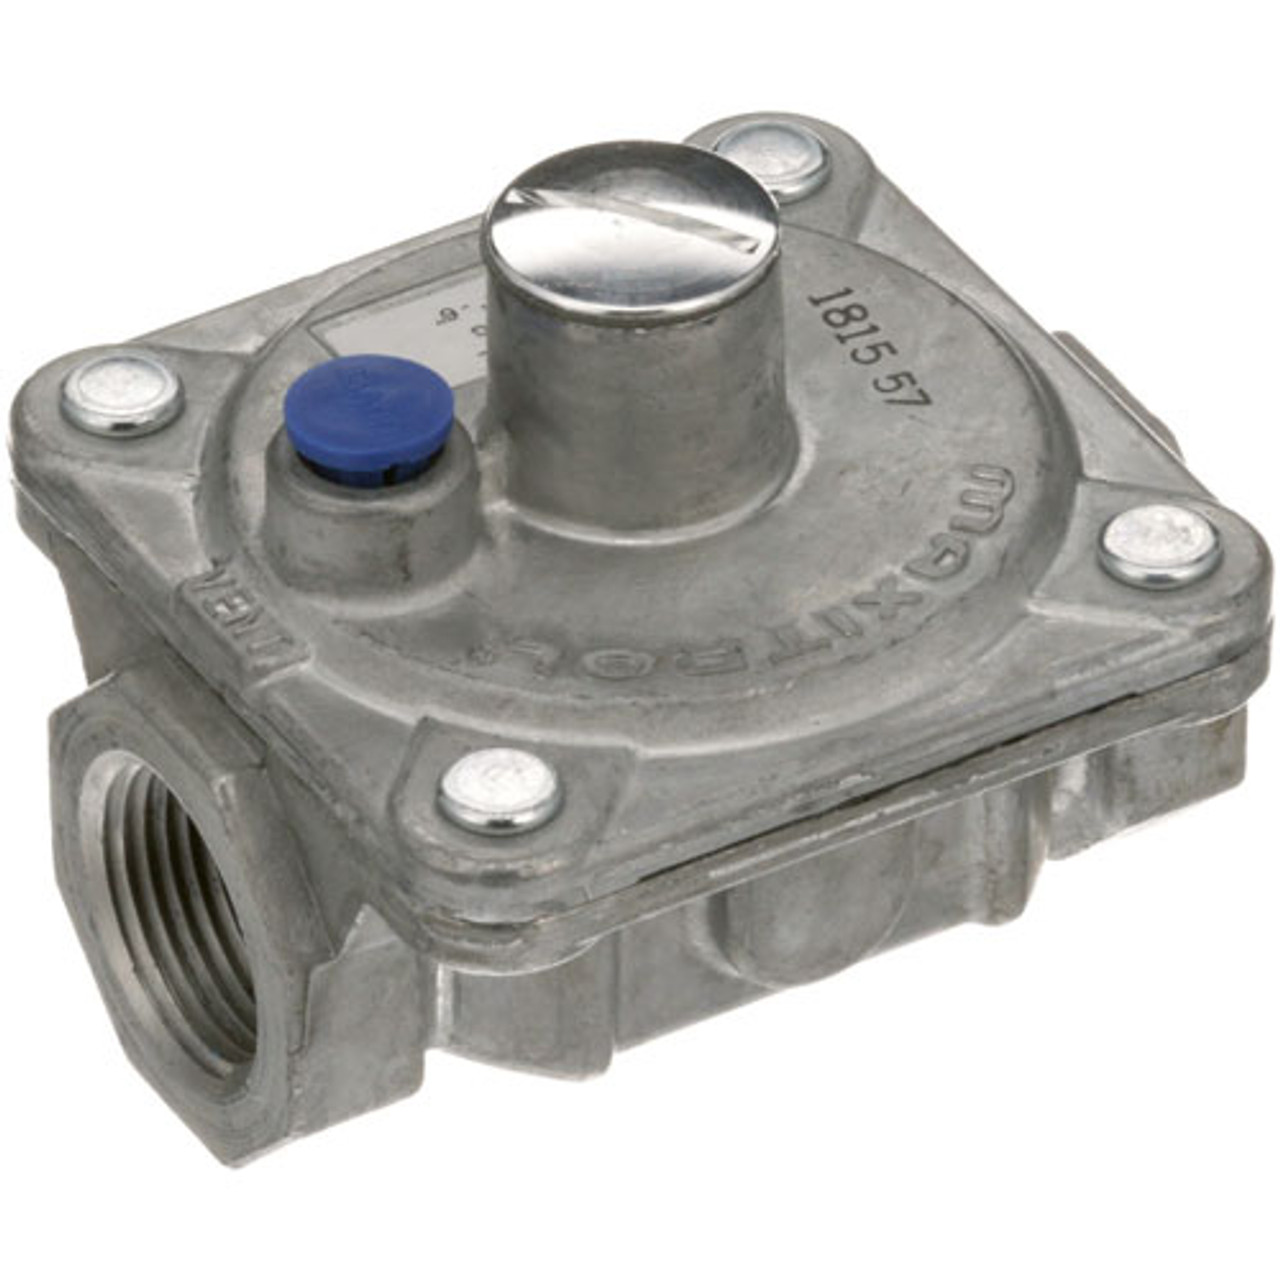 Pressure Regulator 3/4" Nat - Replacement Part For Southbend 1160164